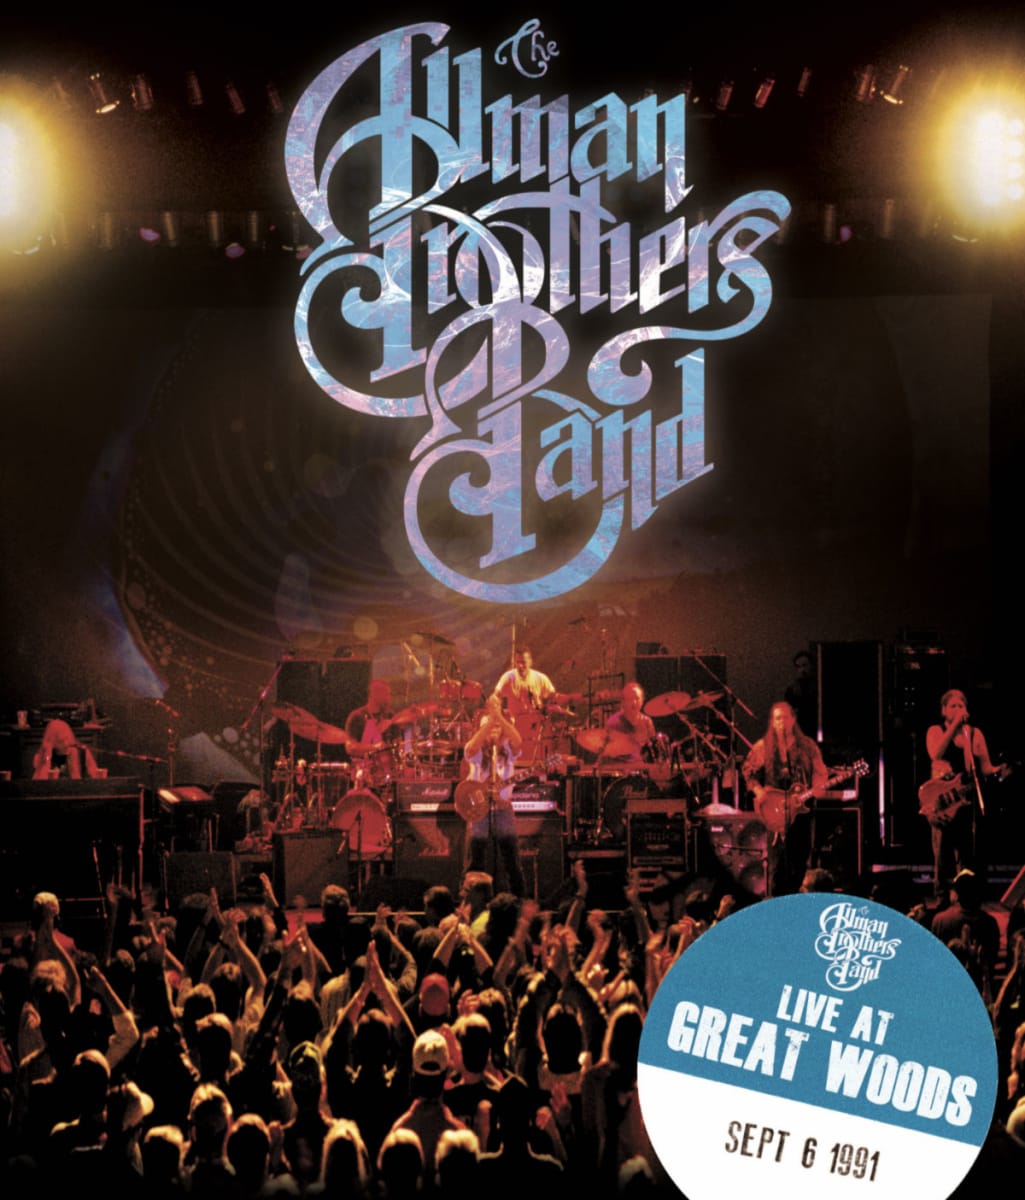 The Allman Brothers Band: Live At Great Woods 1991 DVD